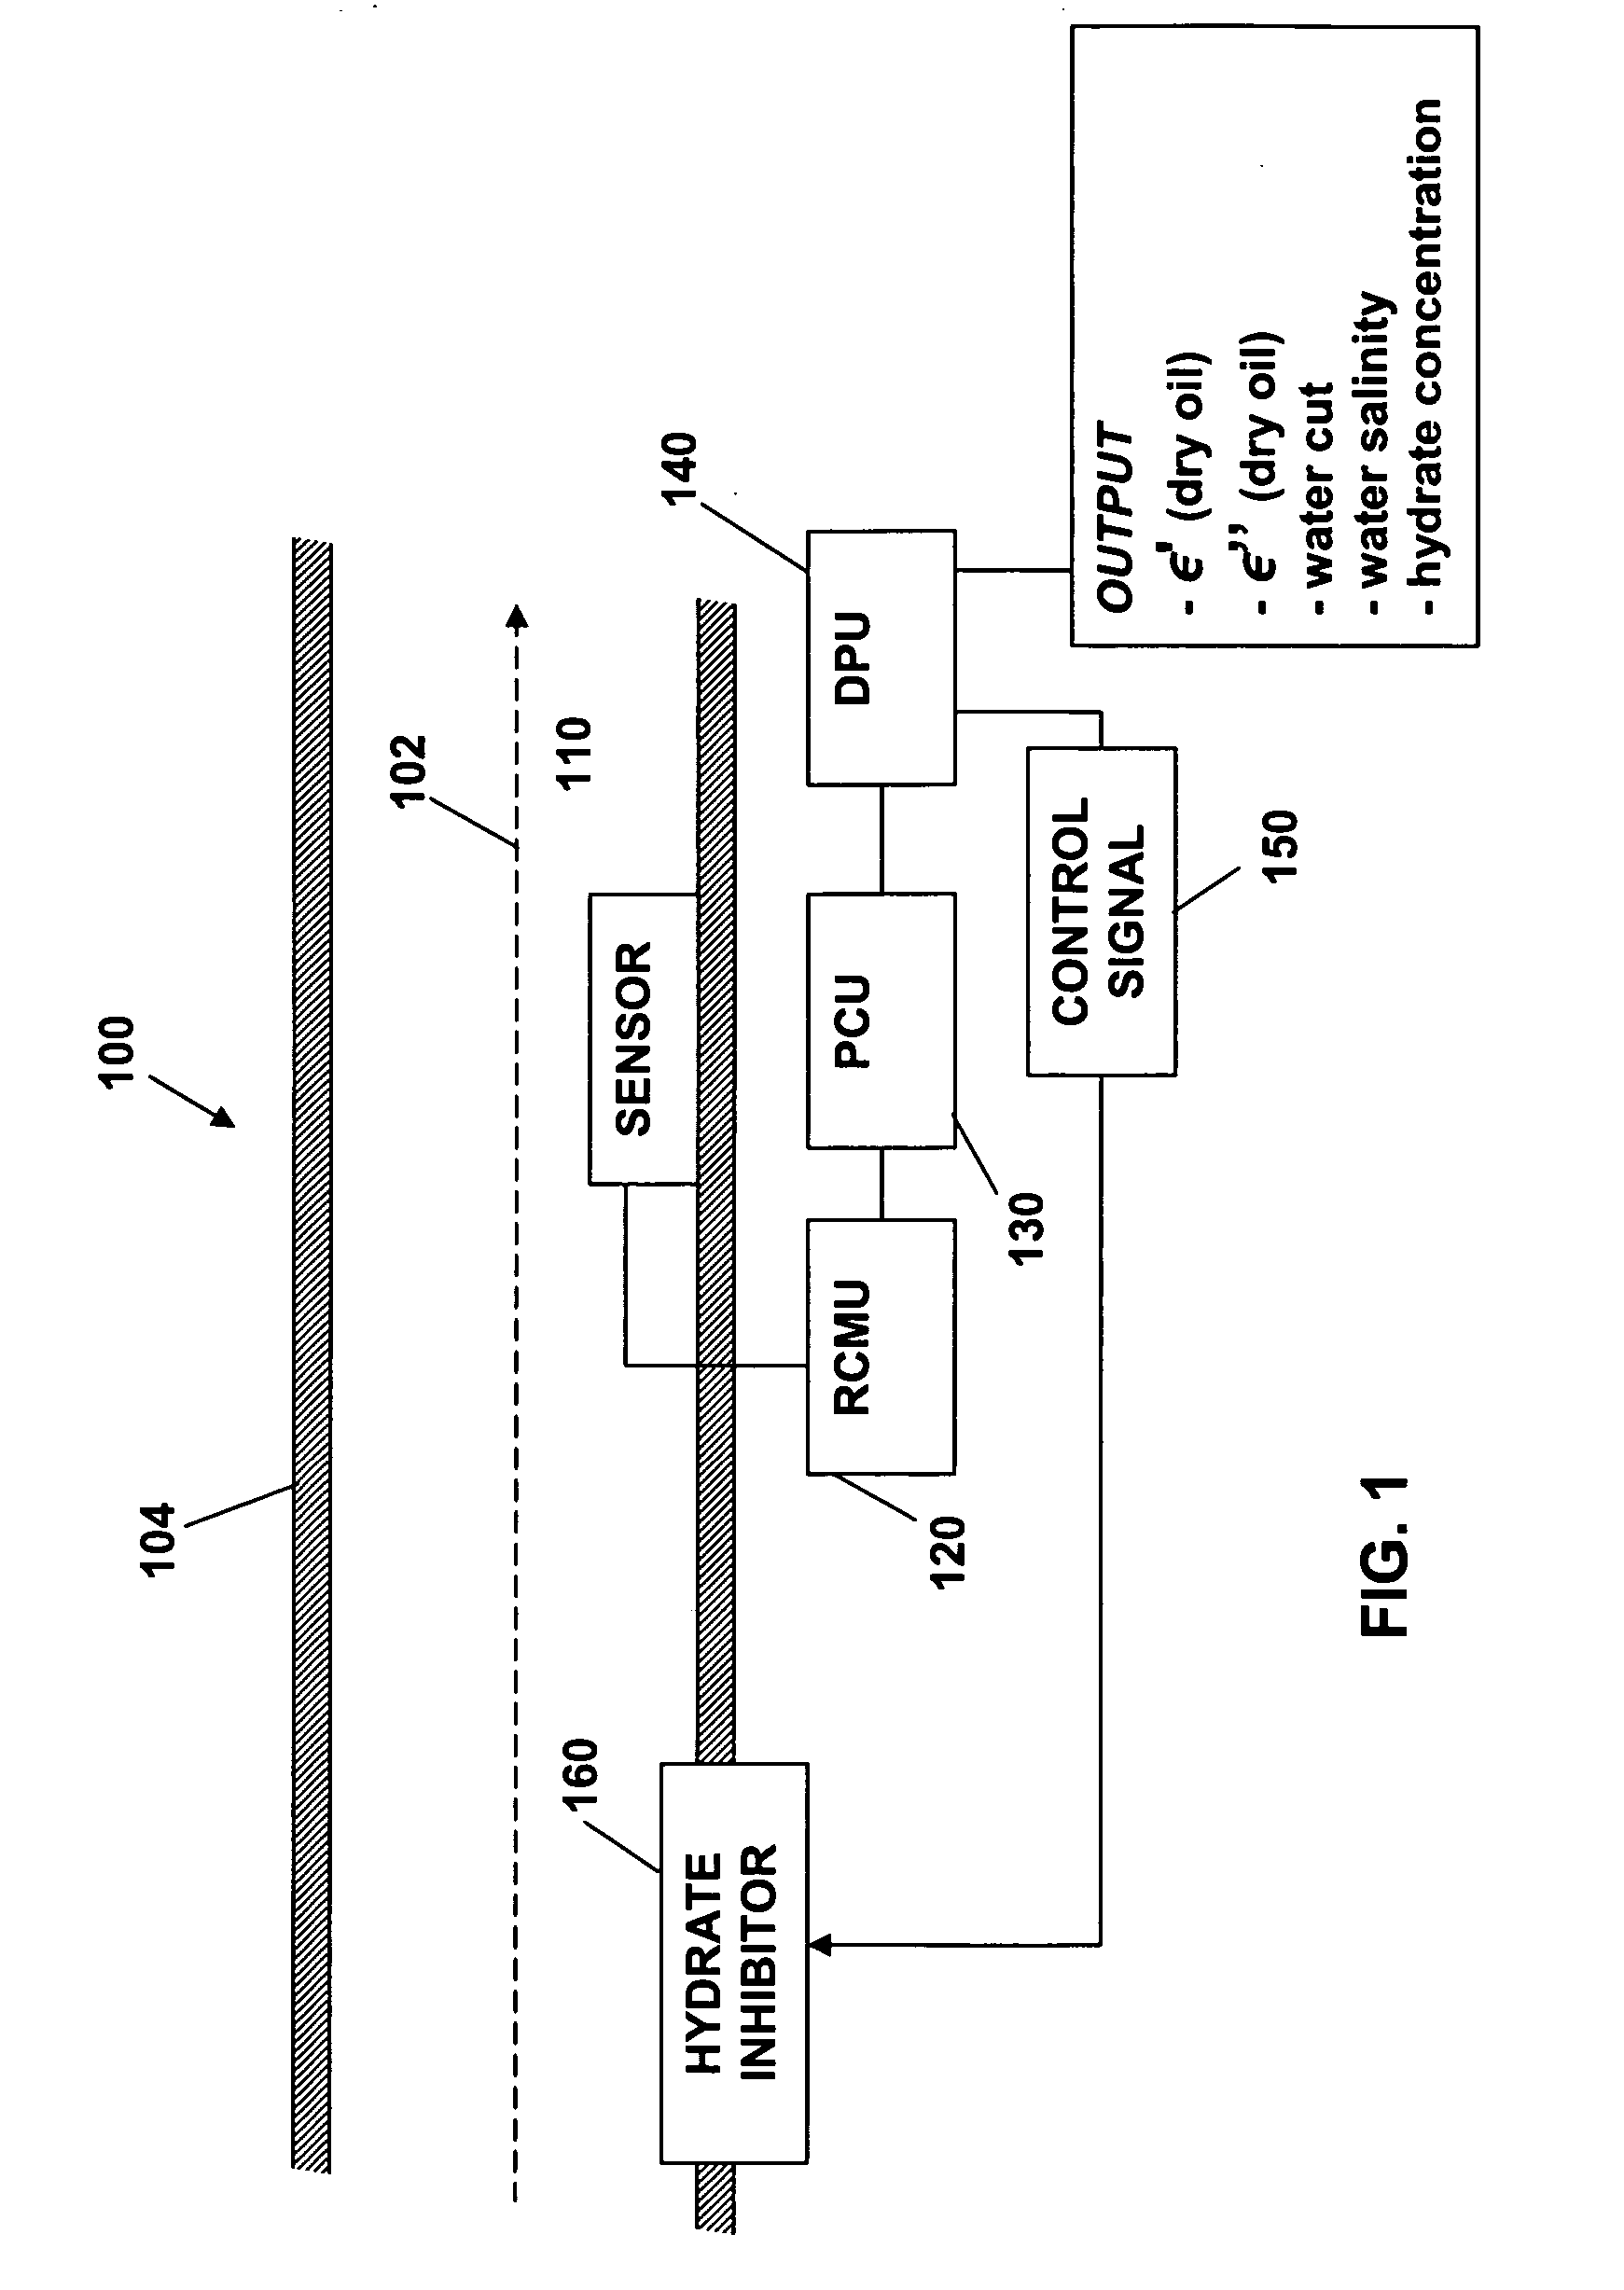 Method and apparatus for detecting water in a fluid media